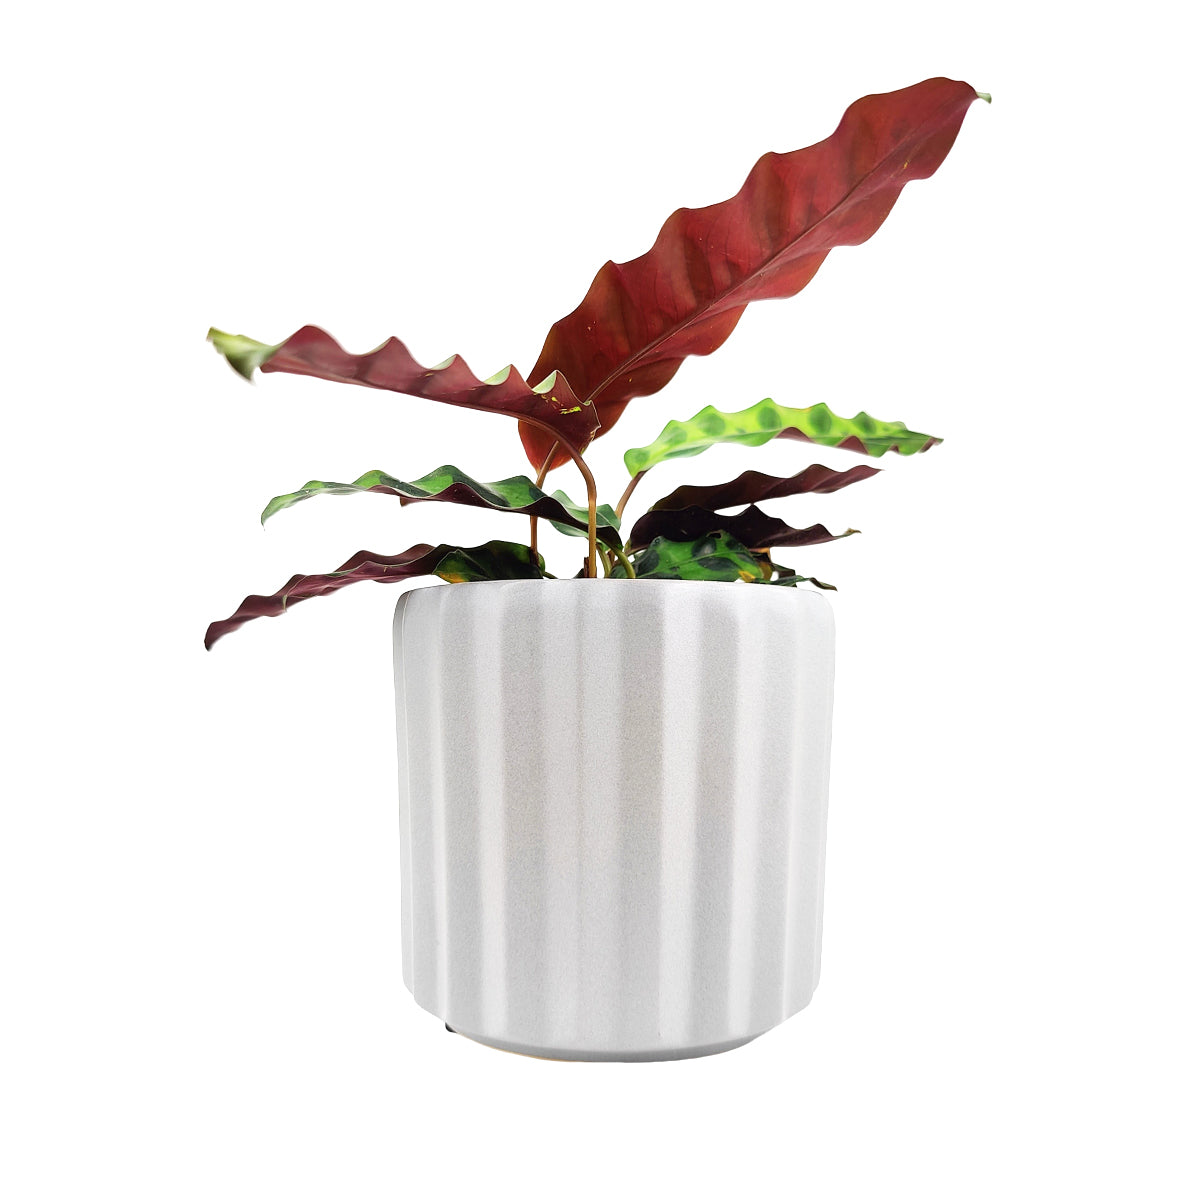 5 inch Glazed Ceramic Planter with Drainage Hole for Succulent and Houseplant, 5" White Vertical Stripes Ceramic Cylinder Houseplant Pot, Decorative Ceramic Flower Pot 5 inch Size, 5" Glazed White Vertical Ribbed Ceramic Succulent Flower Pot Planter, 5" Vertical Ridge Pattern Round Ceramic Flower Pot for Home Office Decor